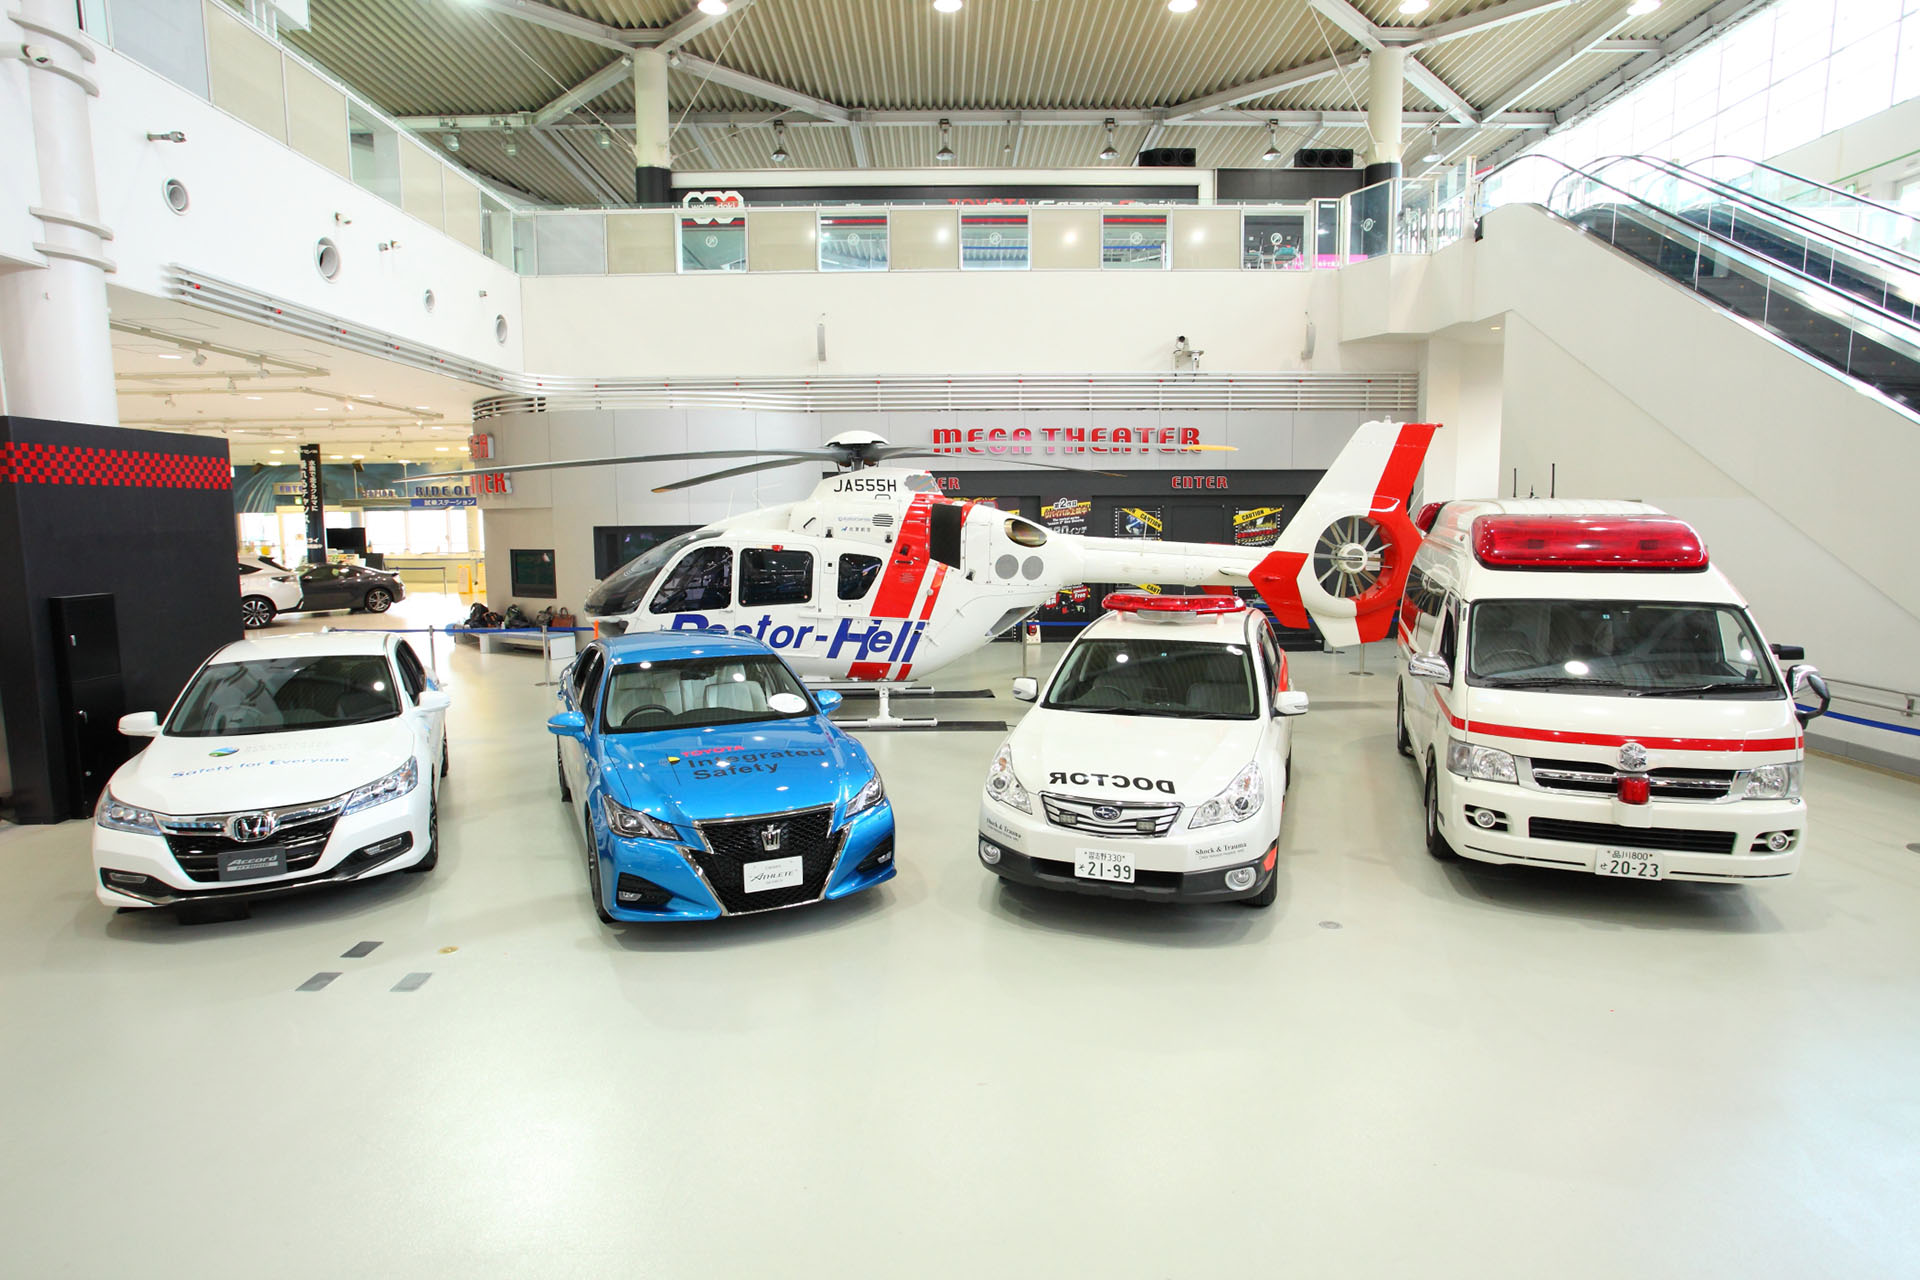 Air ambulance, Ground ambulance, cars compatible with D-Call Net